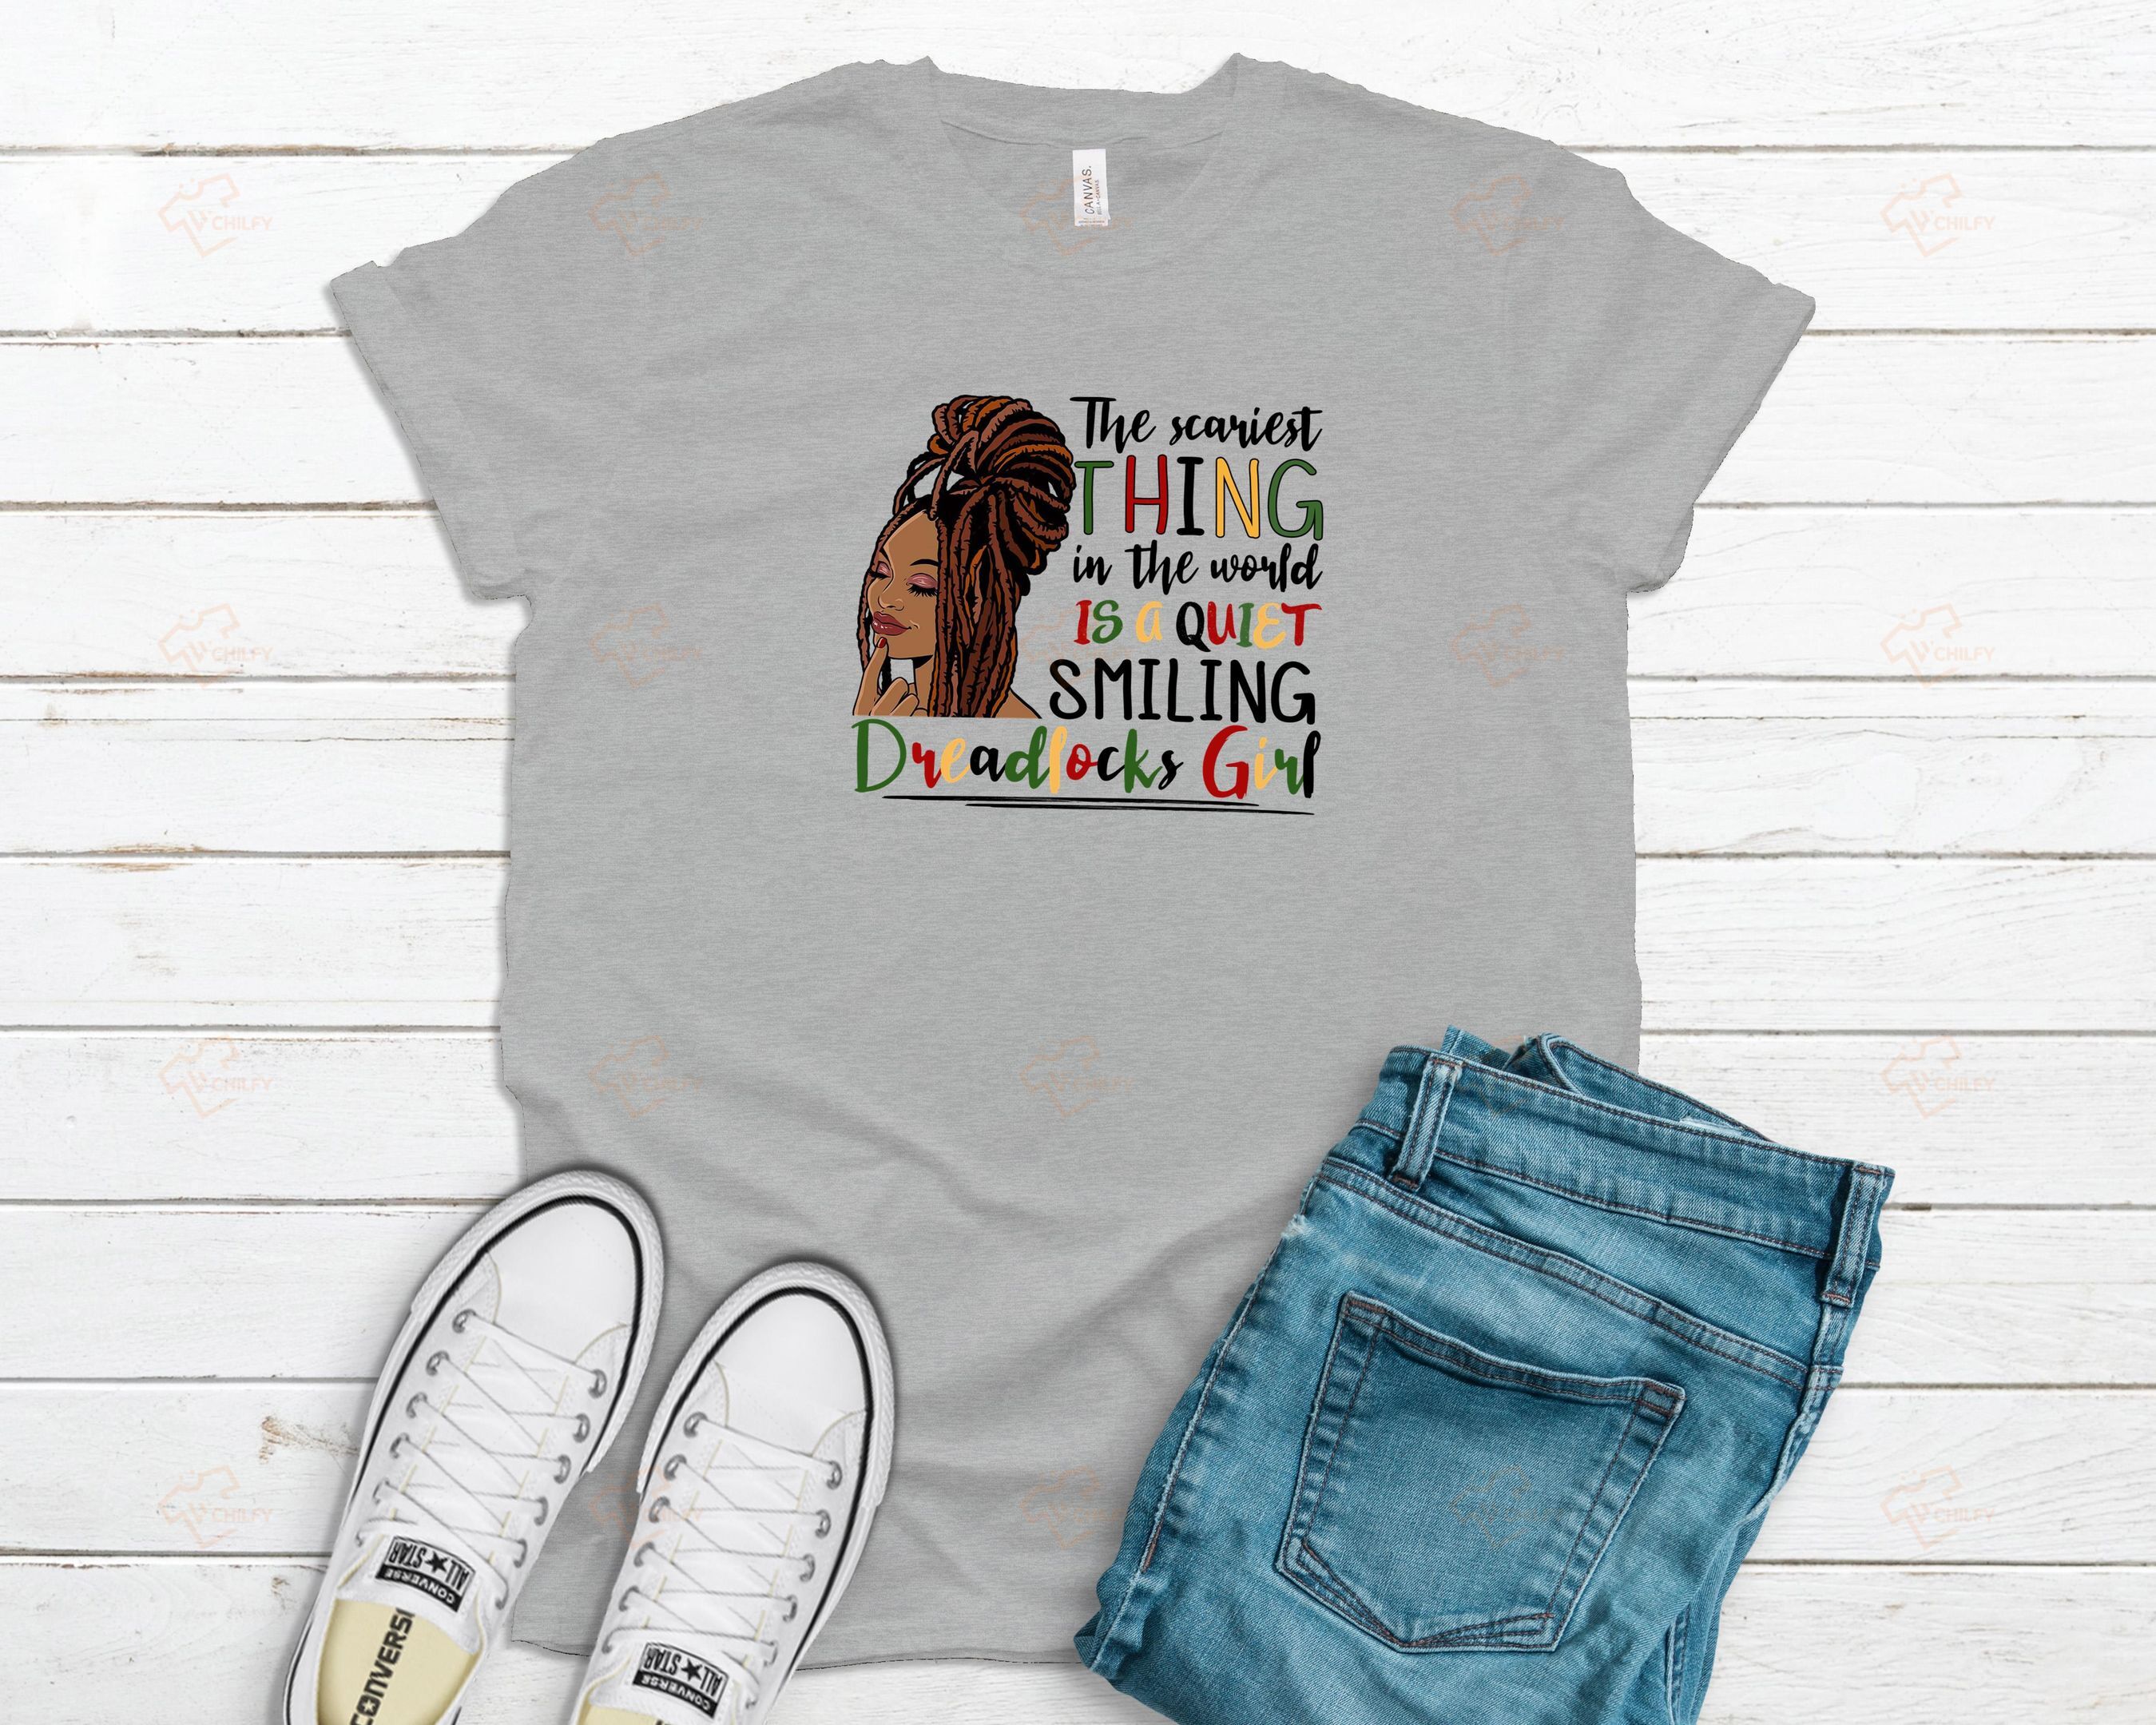 The scariest thing is a quiet smiling dreadlocks girl shirt, locs girl shirt